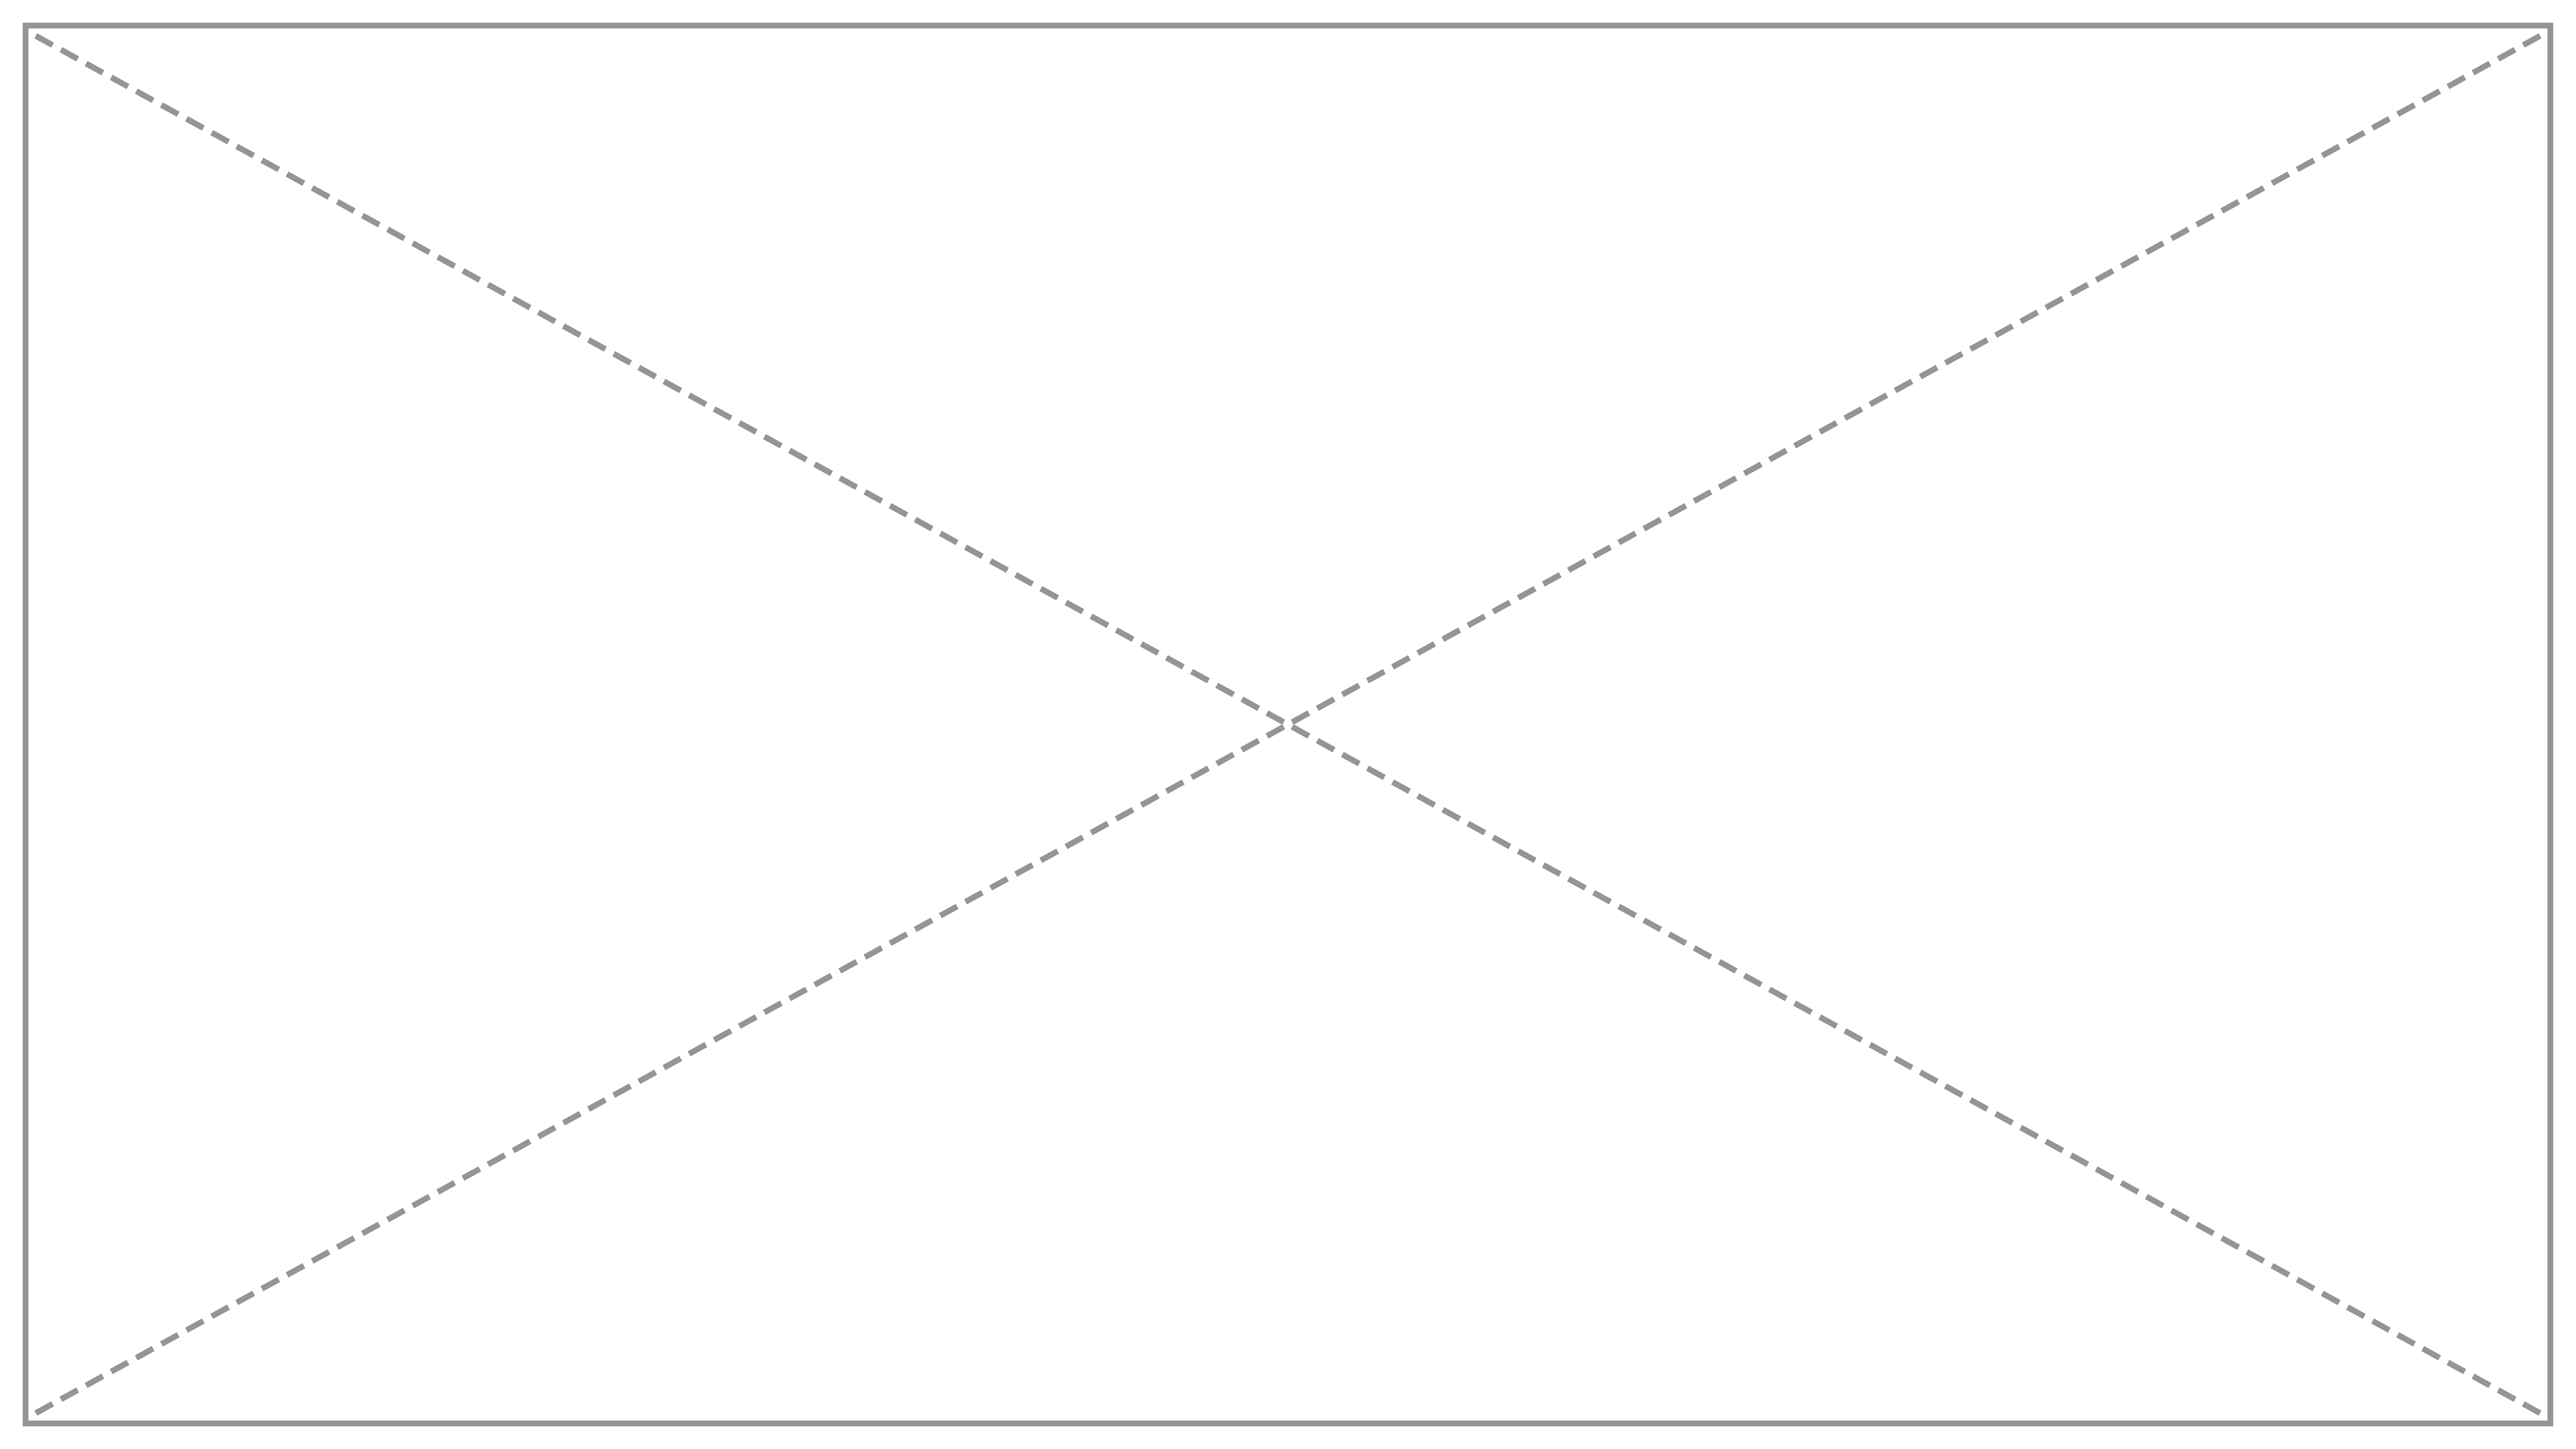 The title image of the project: a white rectangle crossed diagonally with dashed gray lines